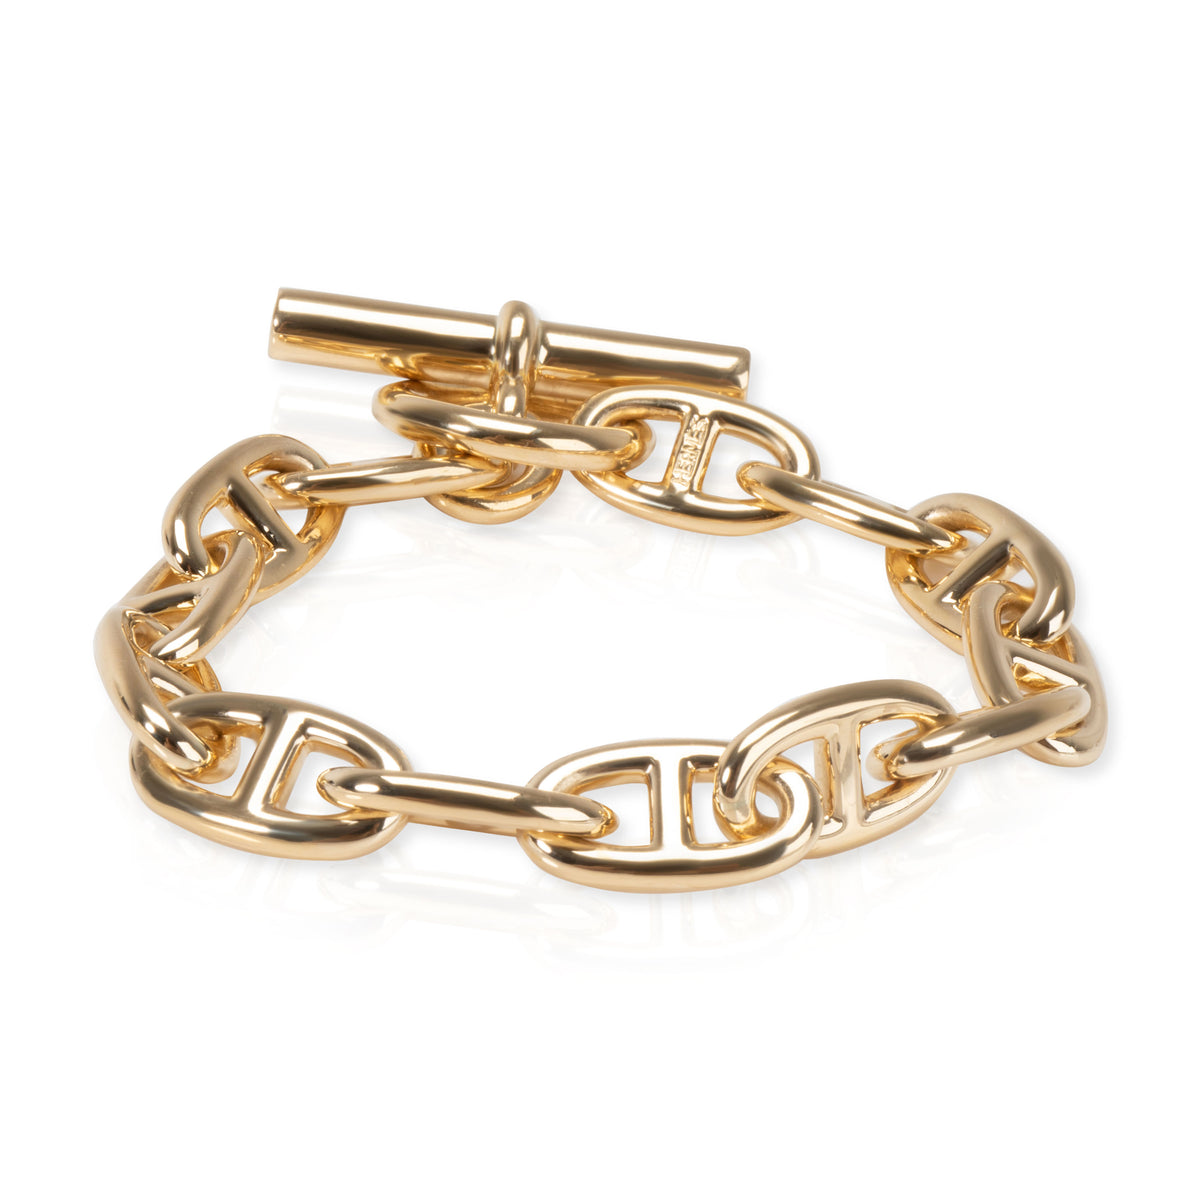 Hermès Chaine D'ancre Toggle Bracelet in 18K Yellow Gold